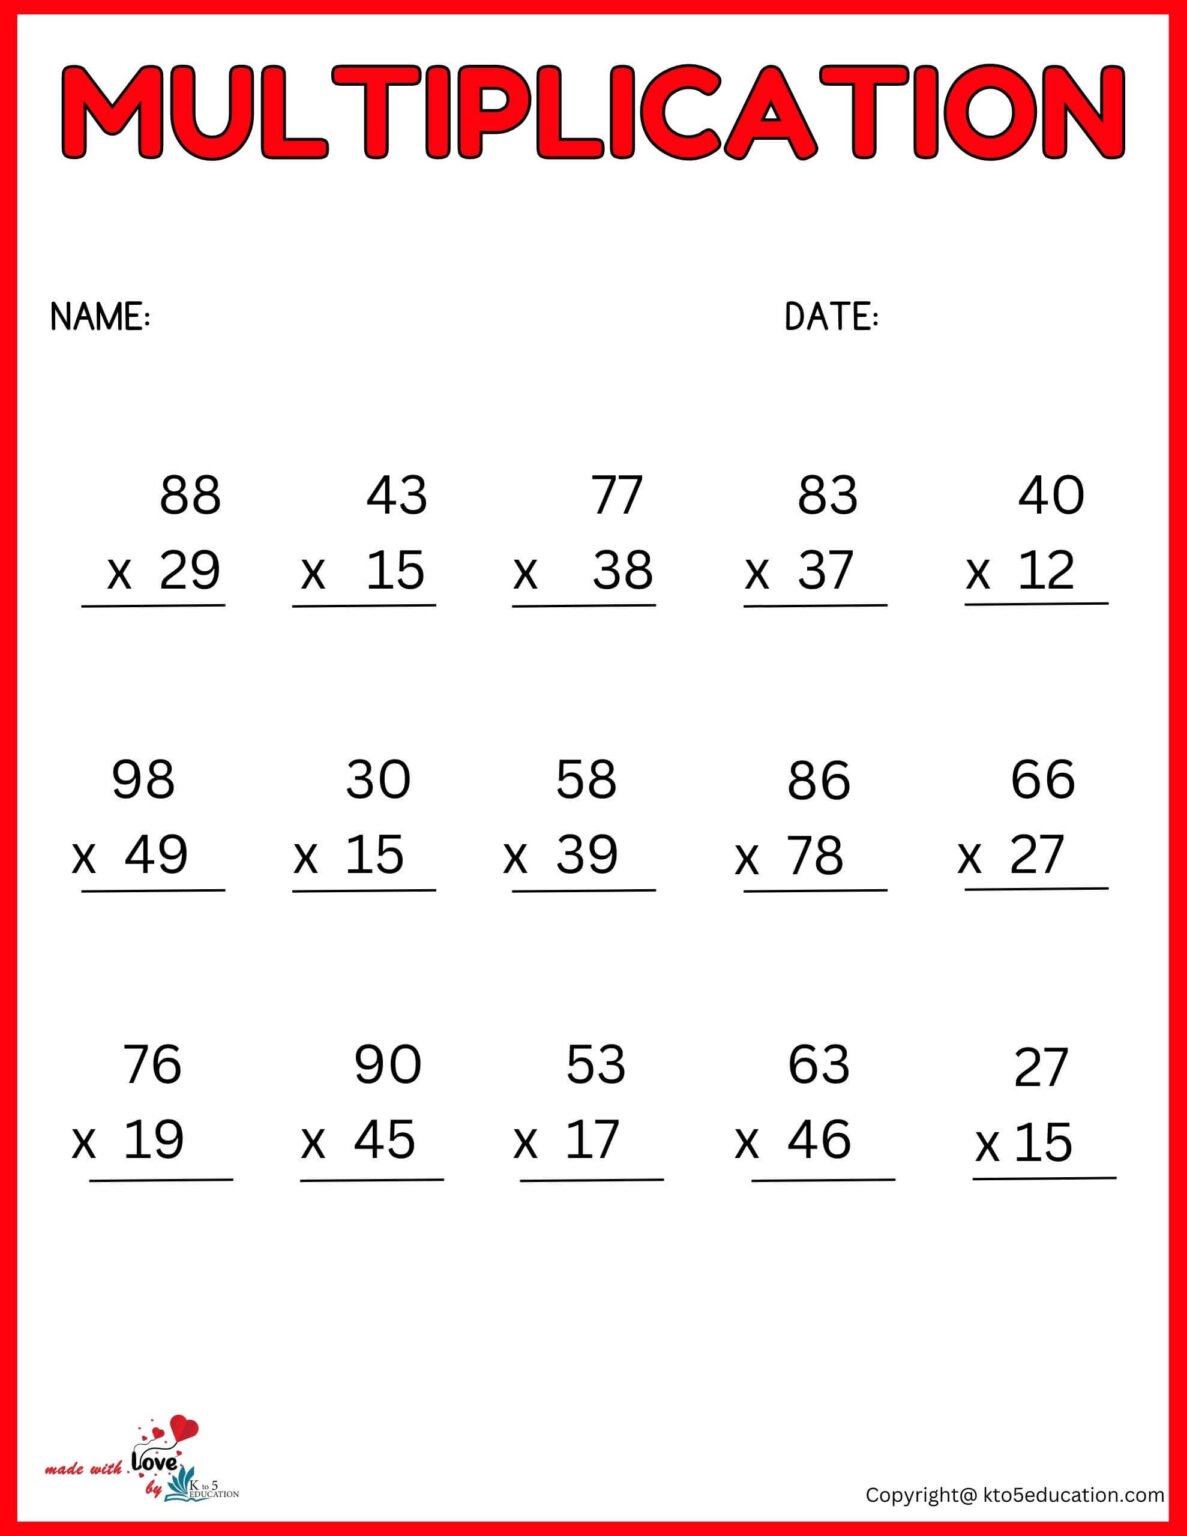 Multiplication Practice Worksheets For Third Grade